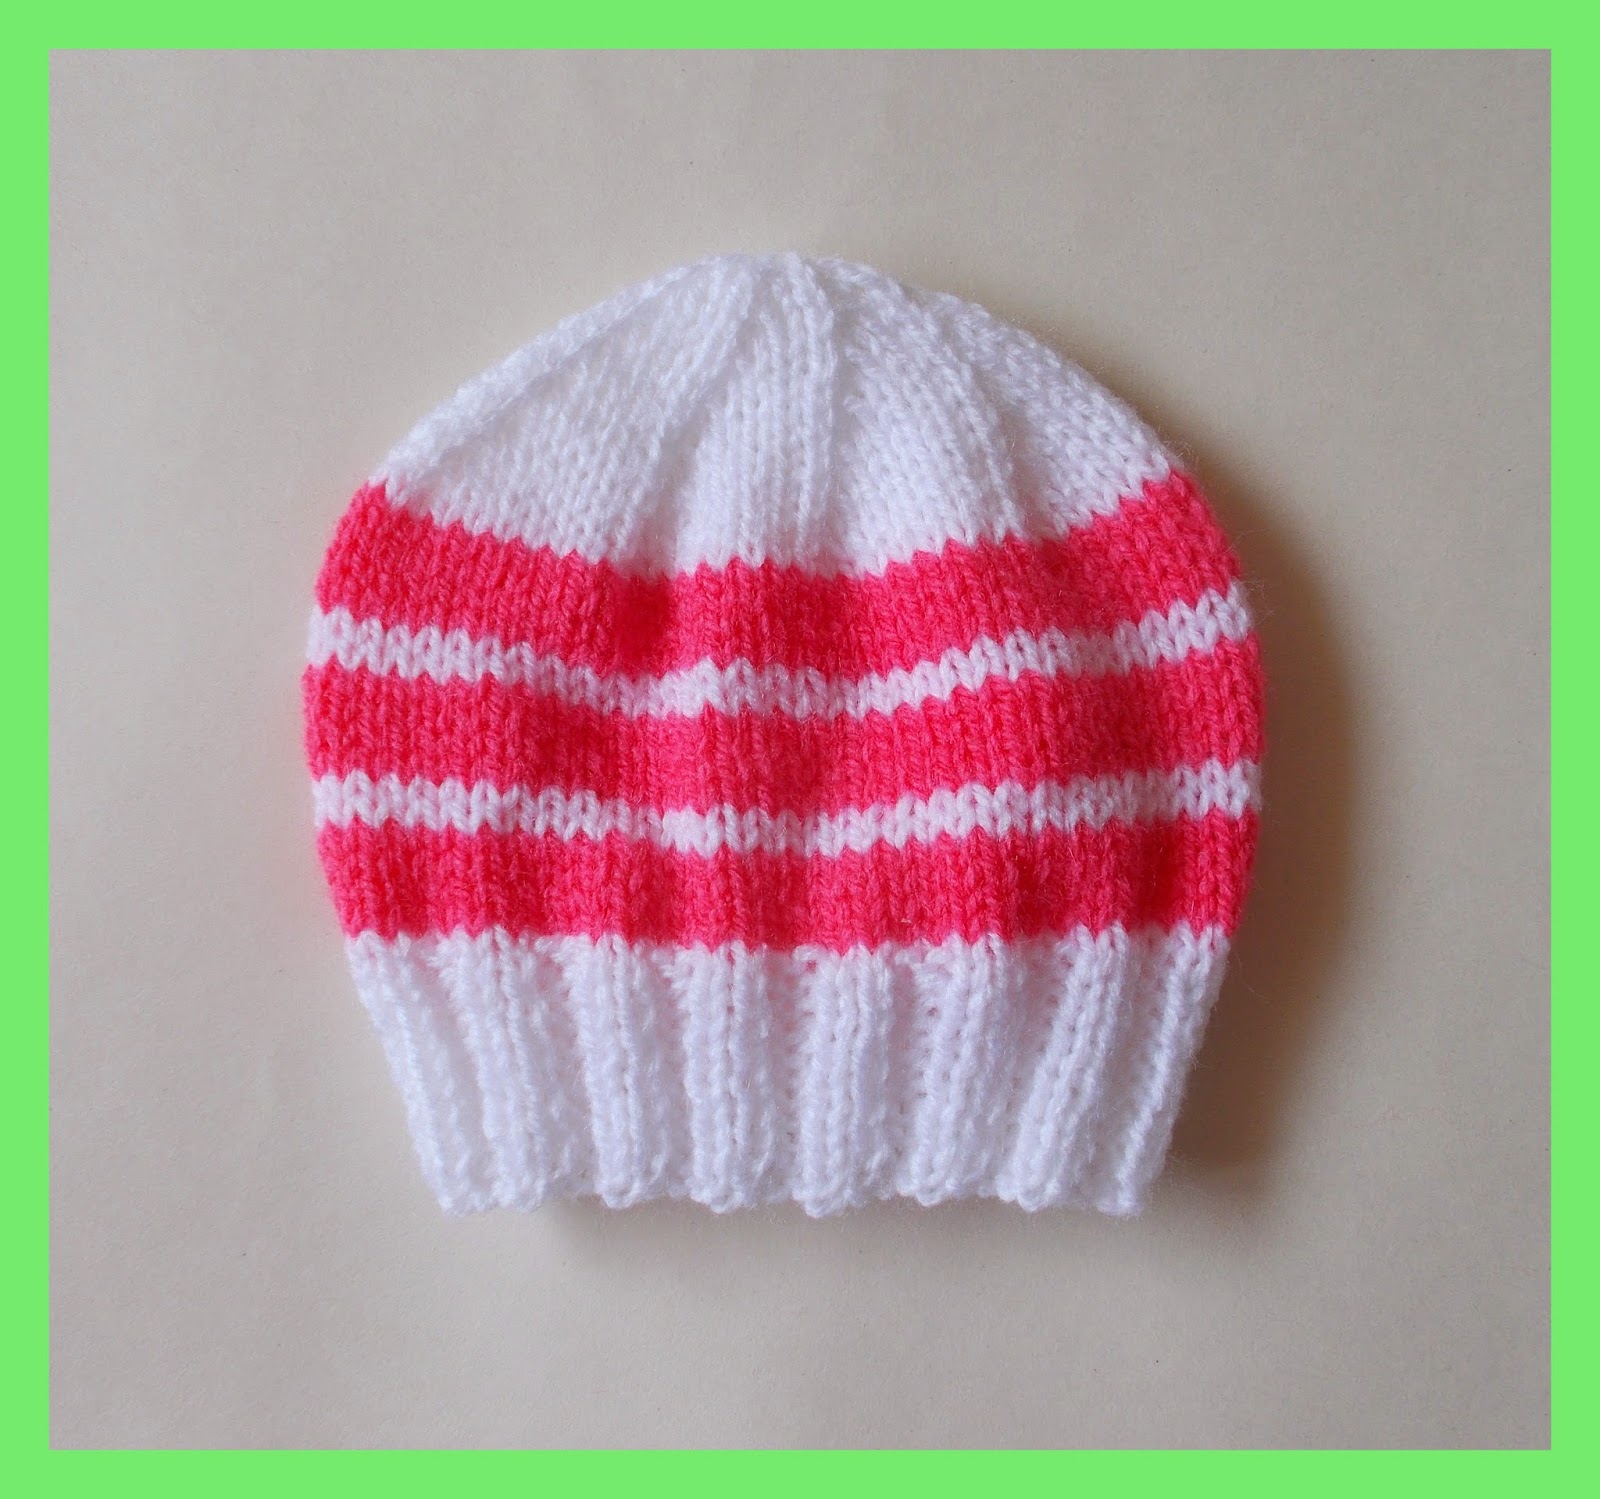 How To Knit A Newborn Baby Hat For Beginners With Circular, 55% OFF